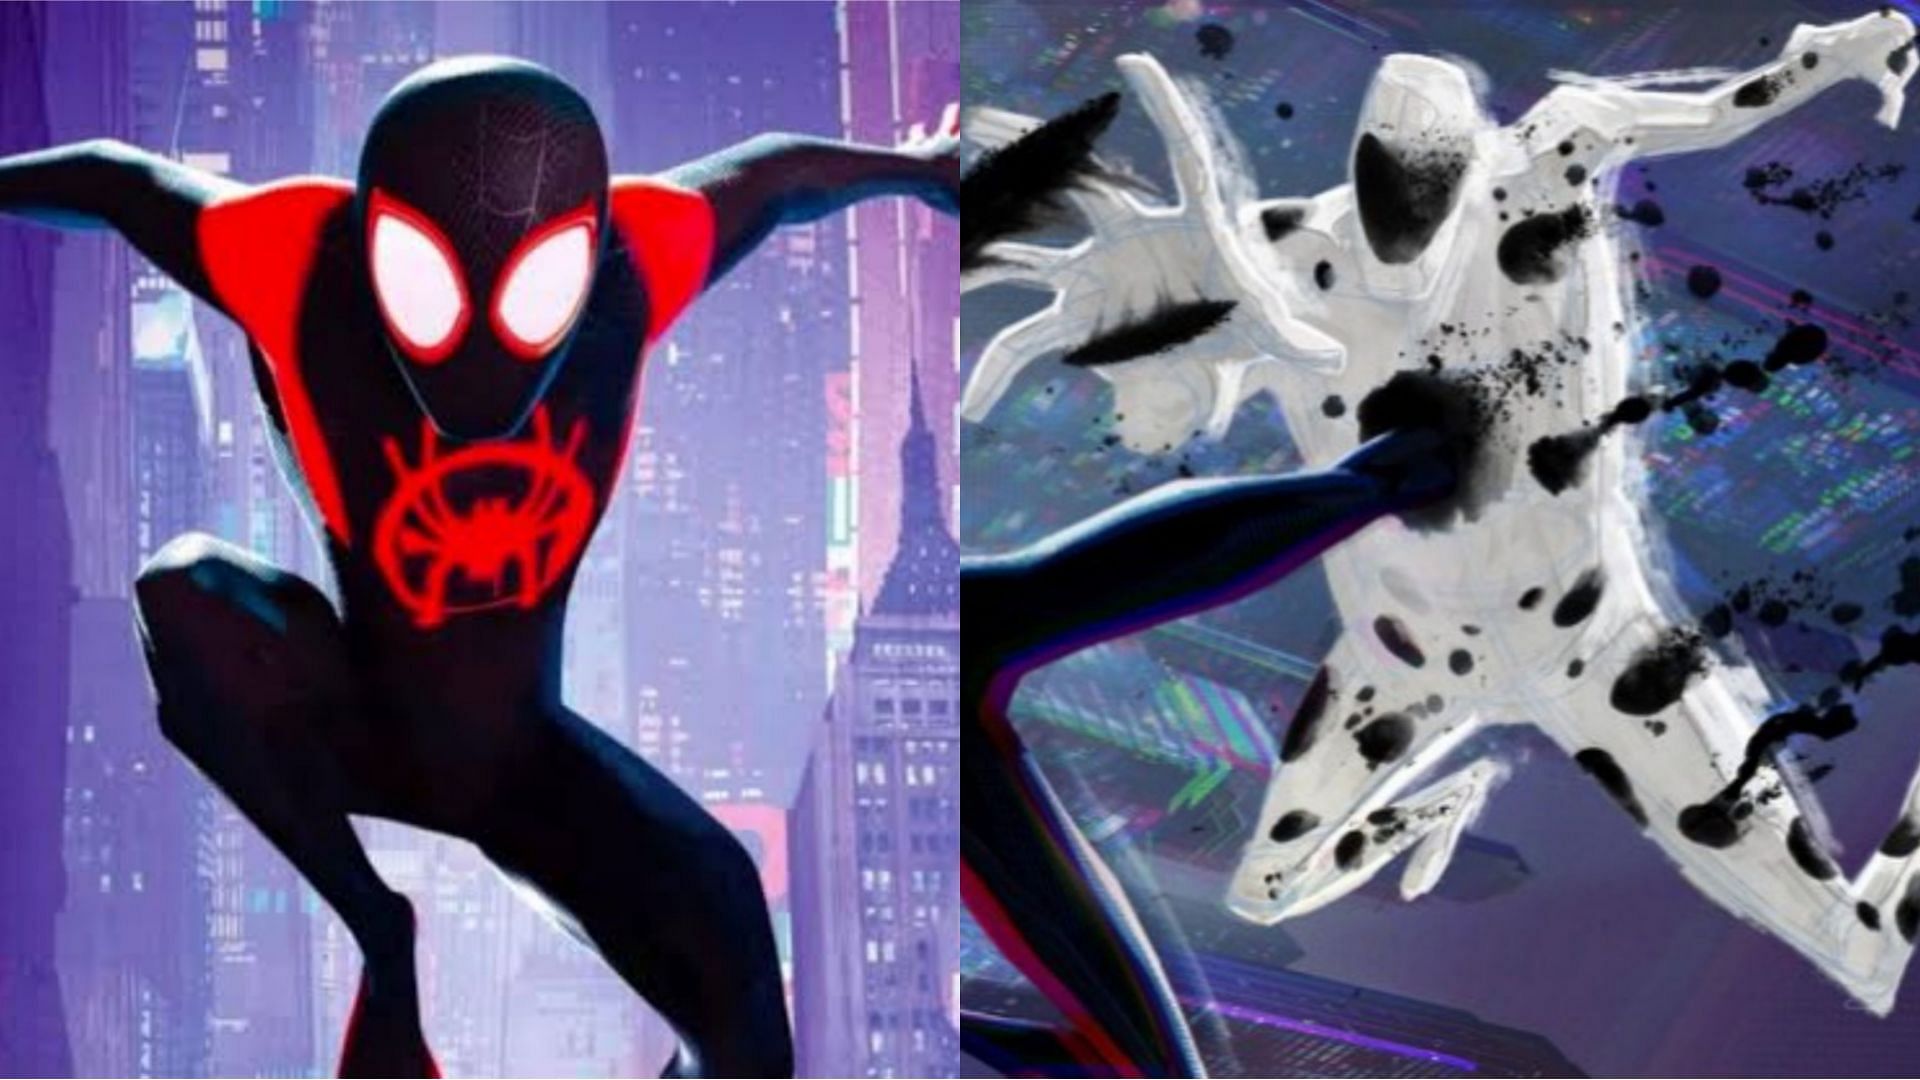 Stills from Into the Spider-Verse and Across the Spider-Verse (Images via Sony Pictures)